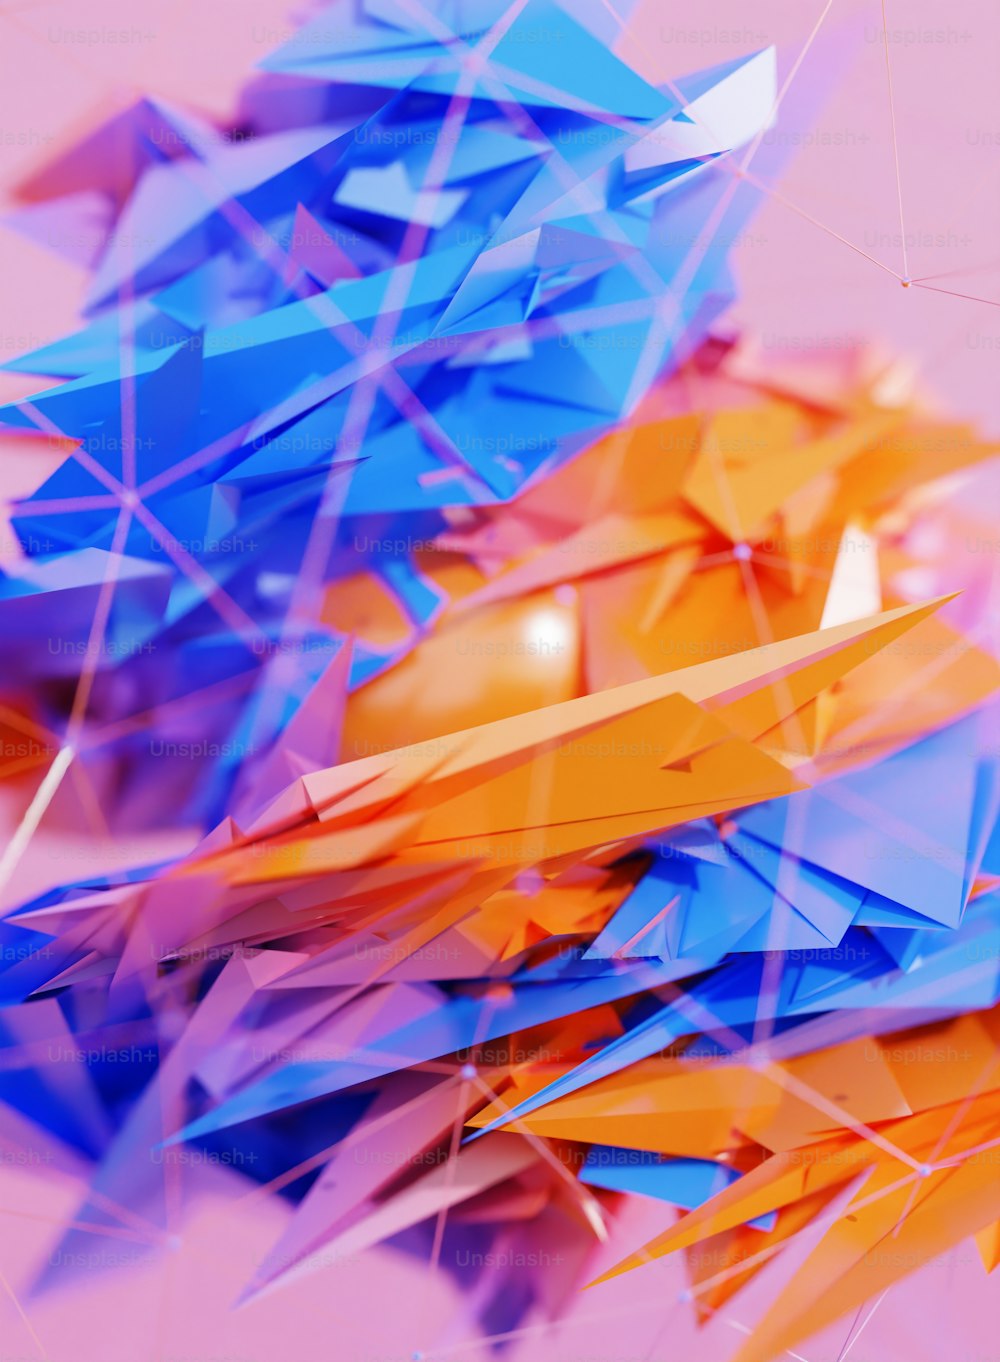 a bunch of blue and orange objects on a pink background